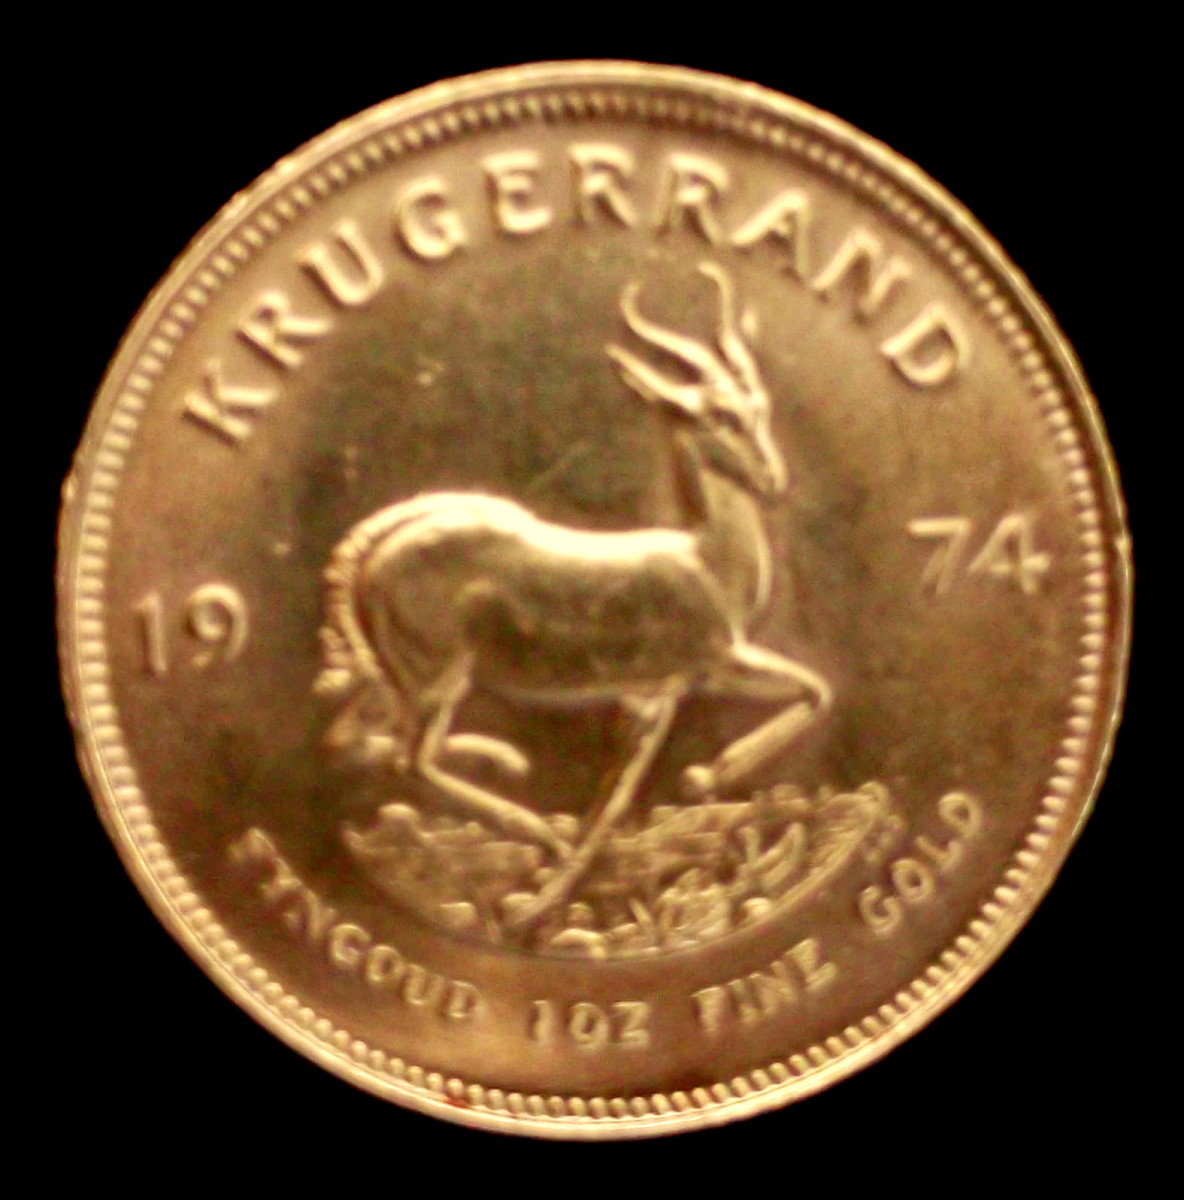 Krugerrand Fine Gold Coin. Portable wealth is very handy in unstable times